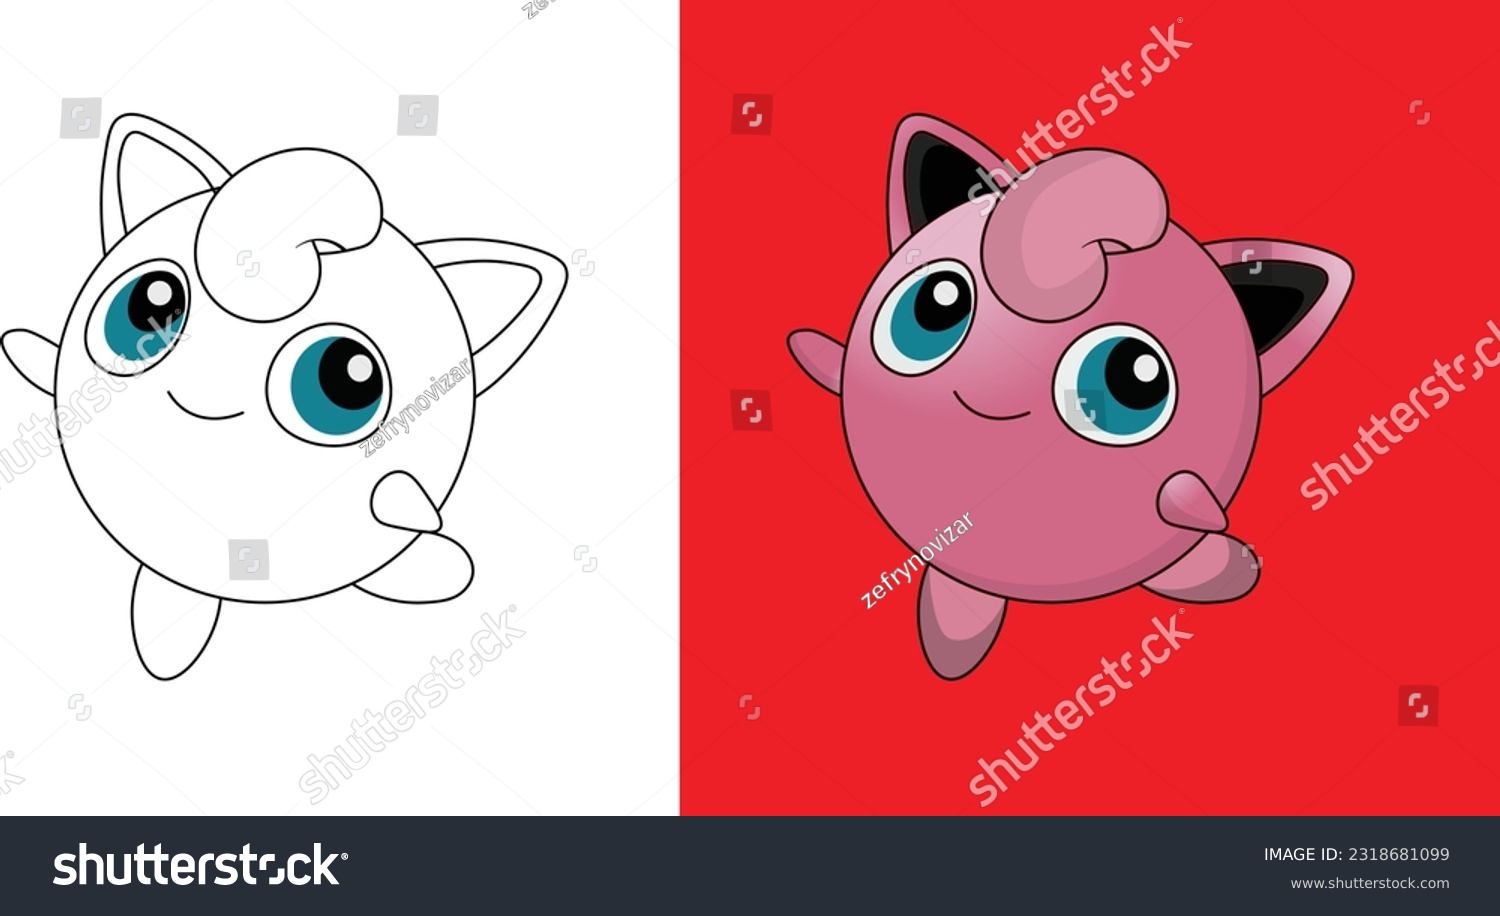 Coloring page jigglypuff pokemon vector illustration stock vector royalty free